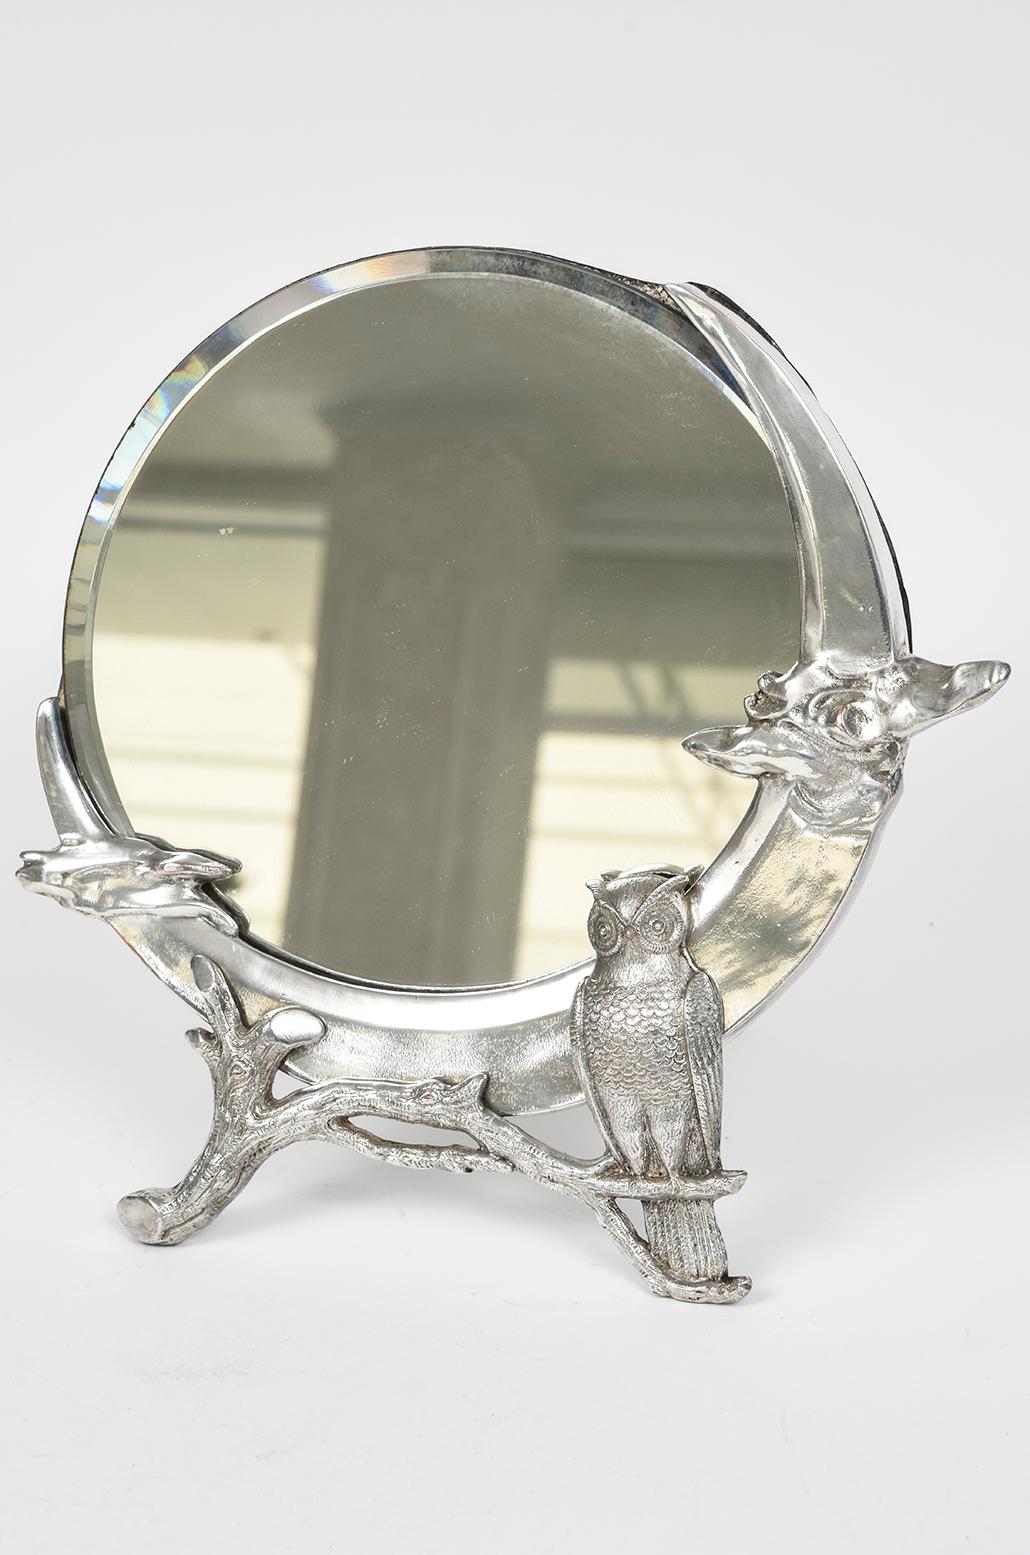 Beautiful dresser mirror with the original bevel glass mirror set into a figural three dimensional owl on a branch along with a cloud on either side.  Measurement is 1 1/8